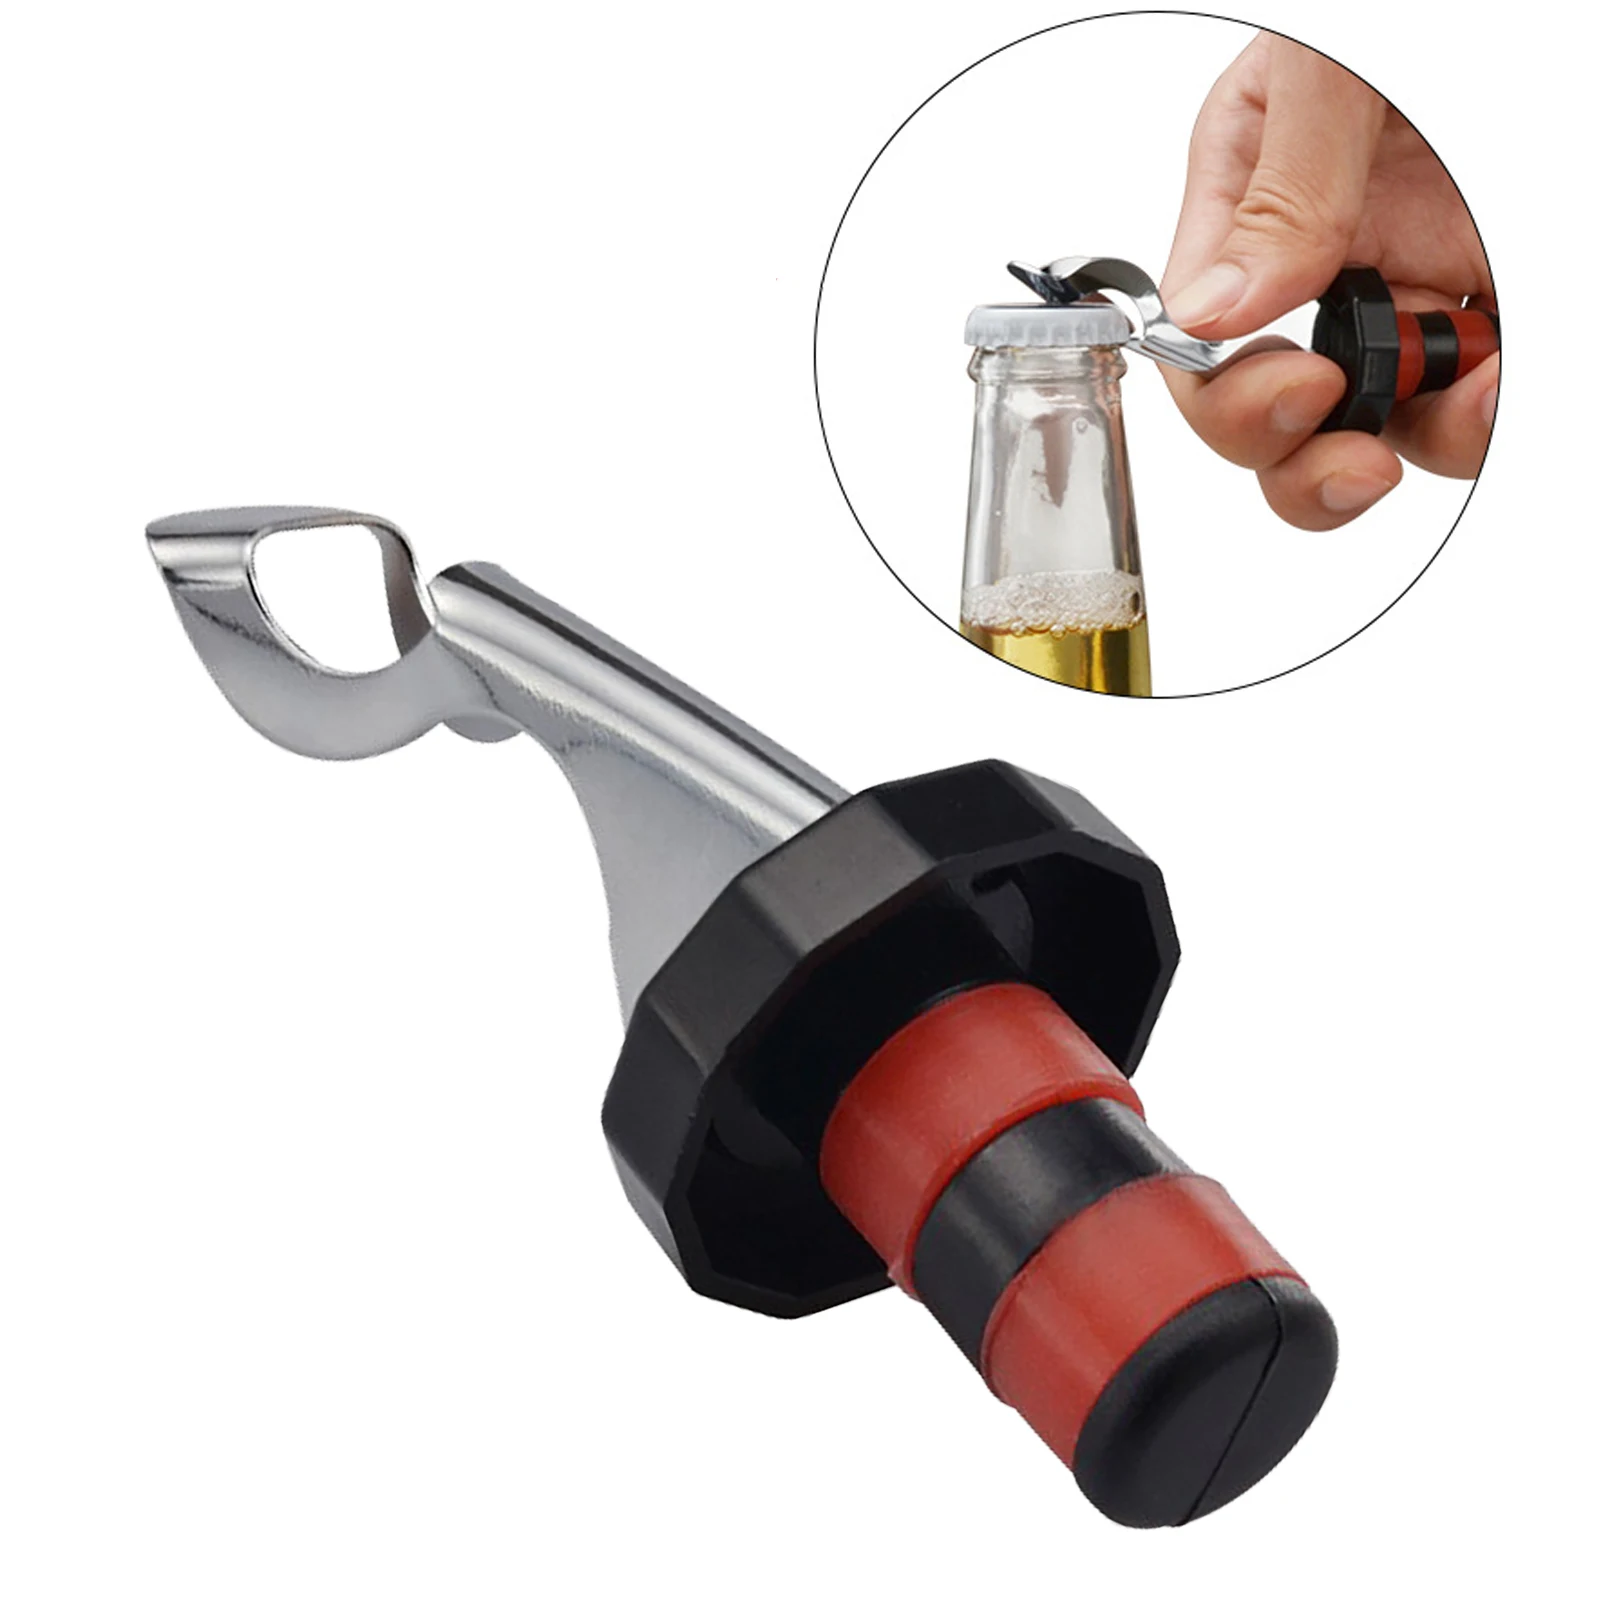 

Wine Stopper Black Red Bottle Cork Silicone Tight Sealing Leakage Proof Vacuum Reusable Beverage Stoppers